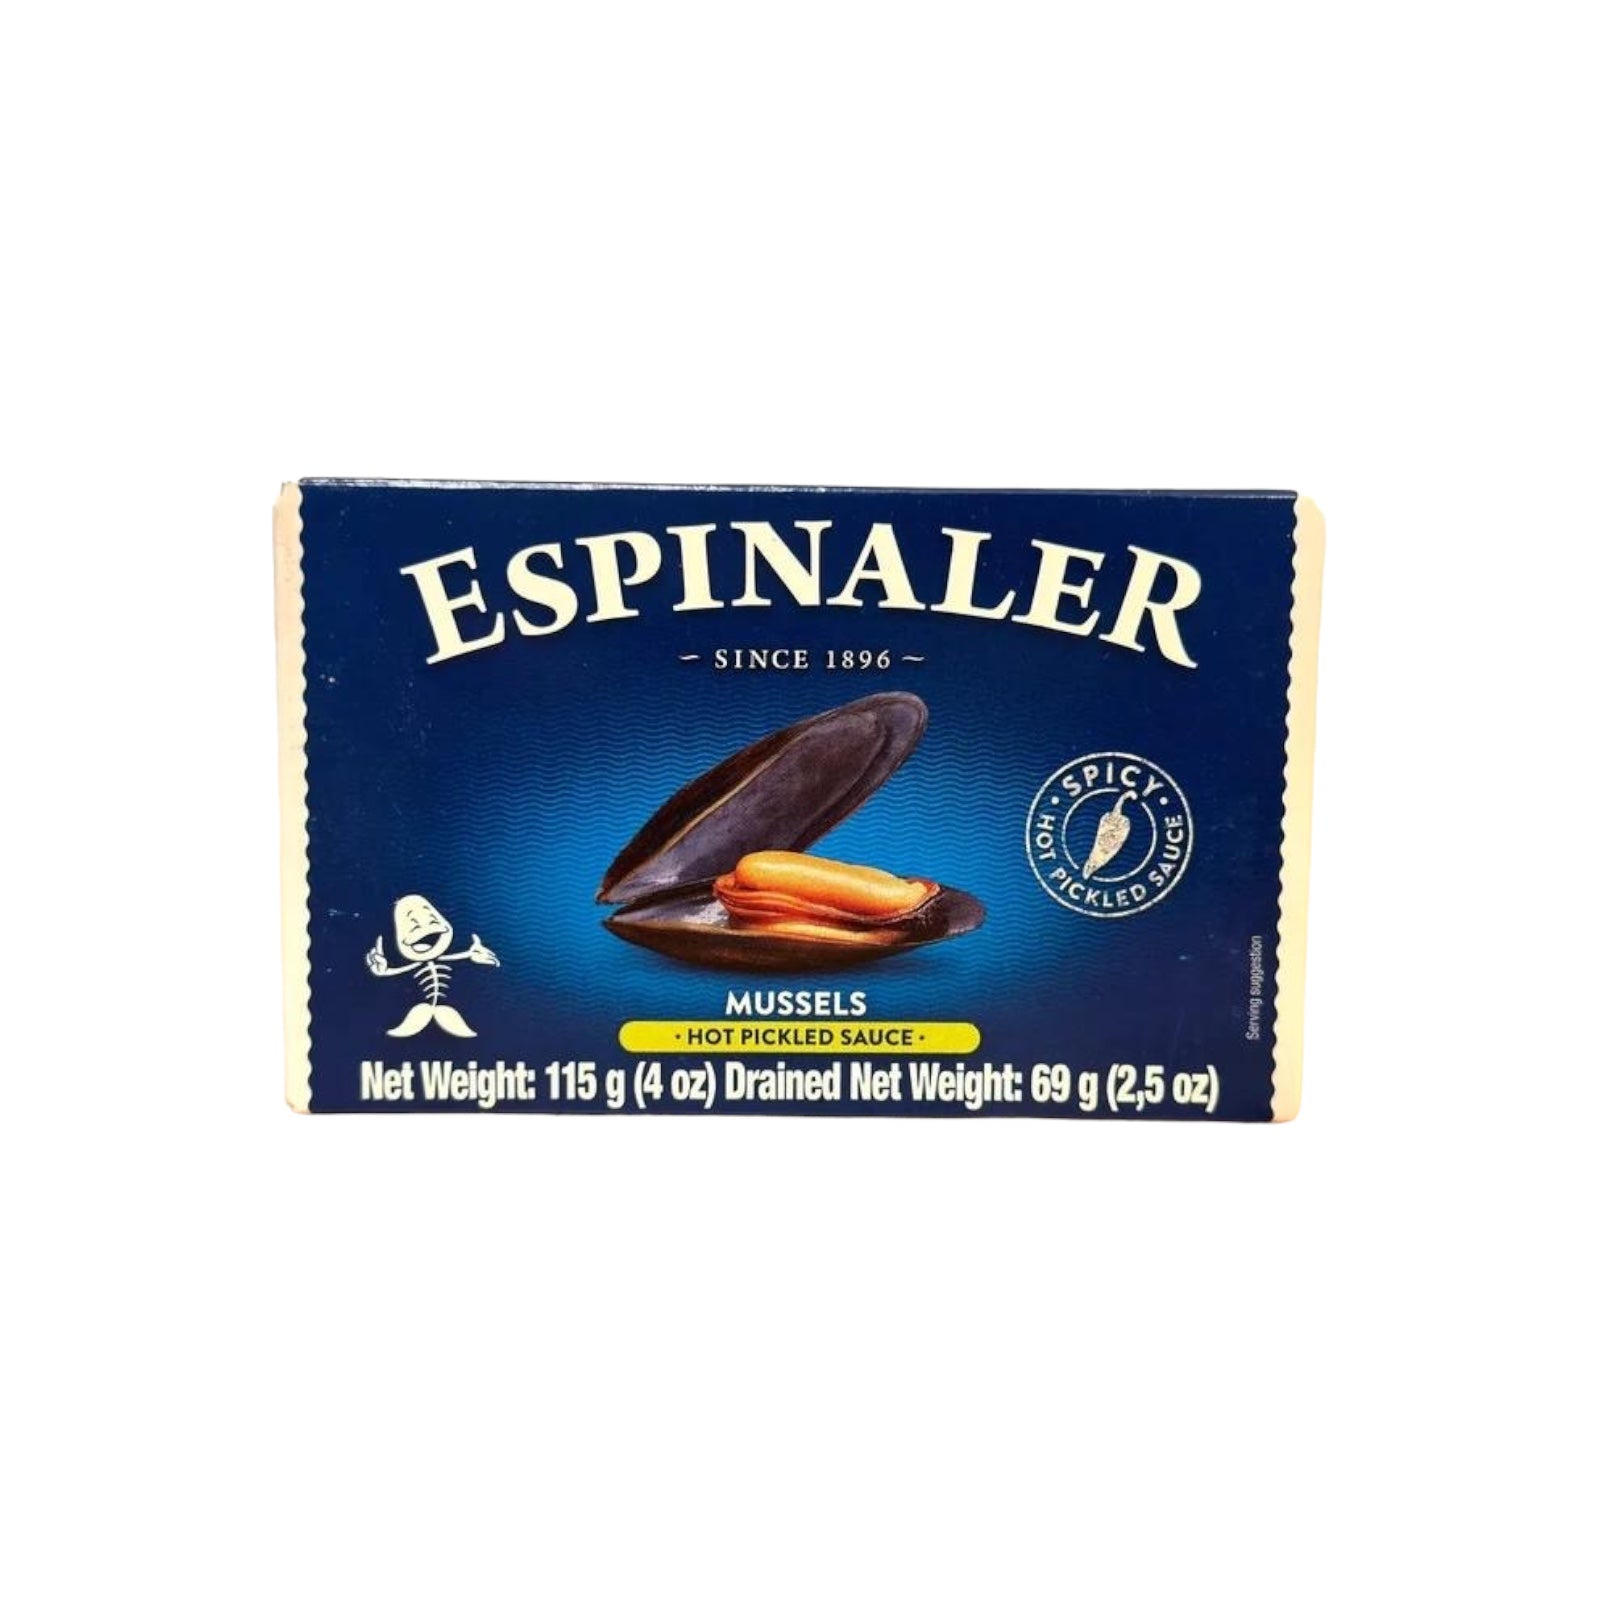 Espinaler Canned Mussels 
Escabeche Spicy (hot pickled sauce )